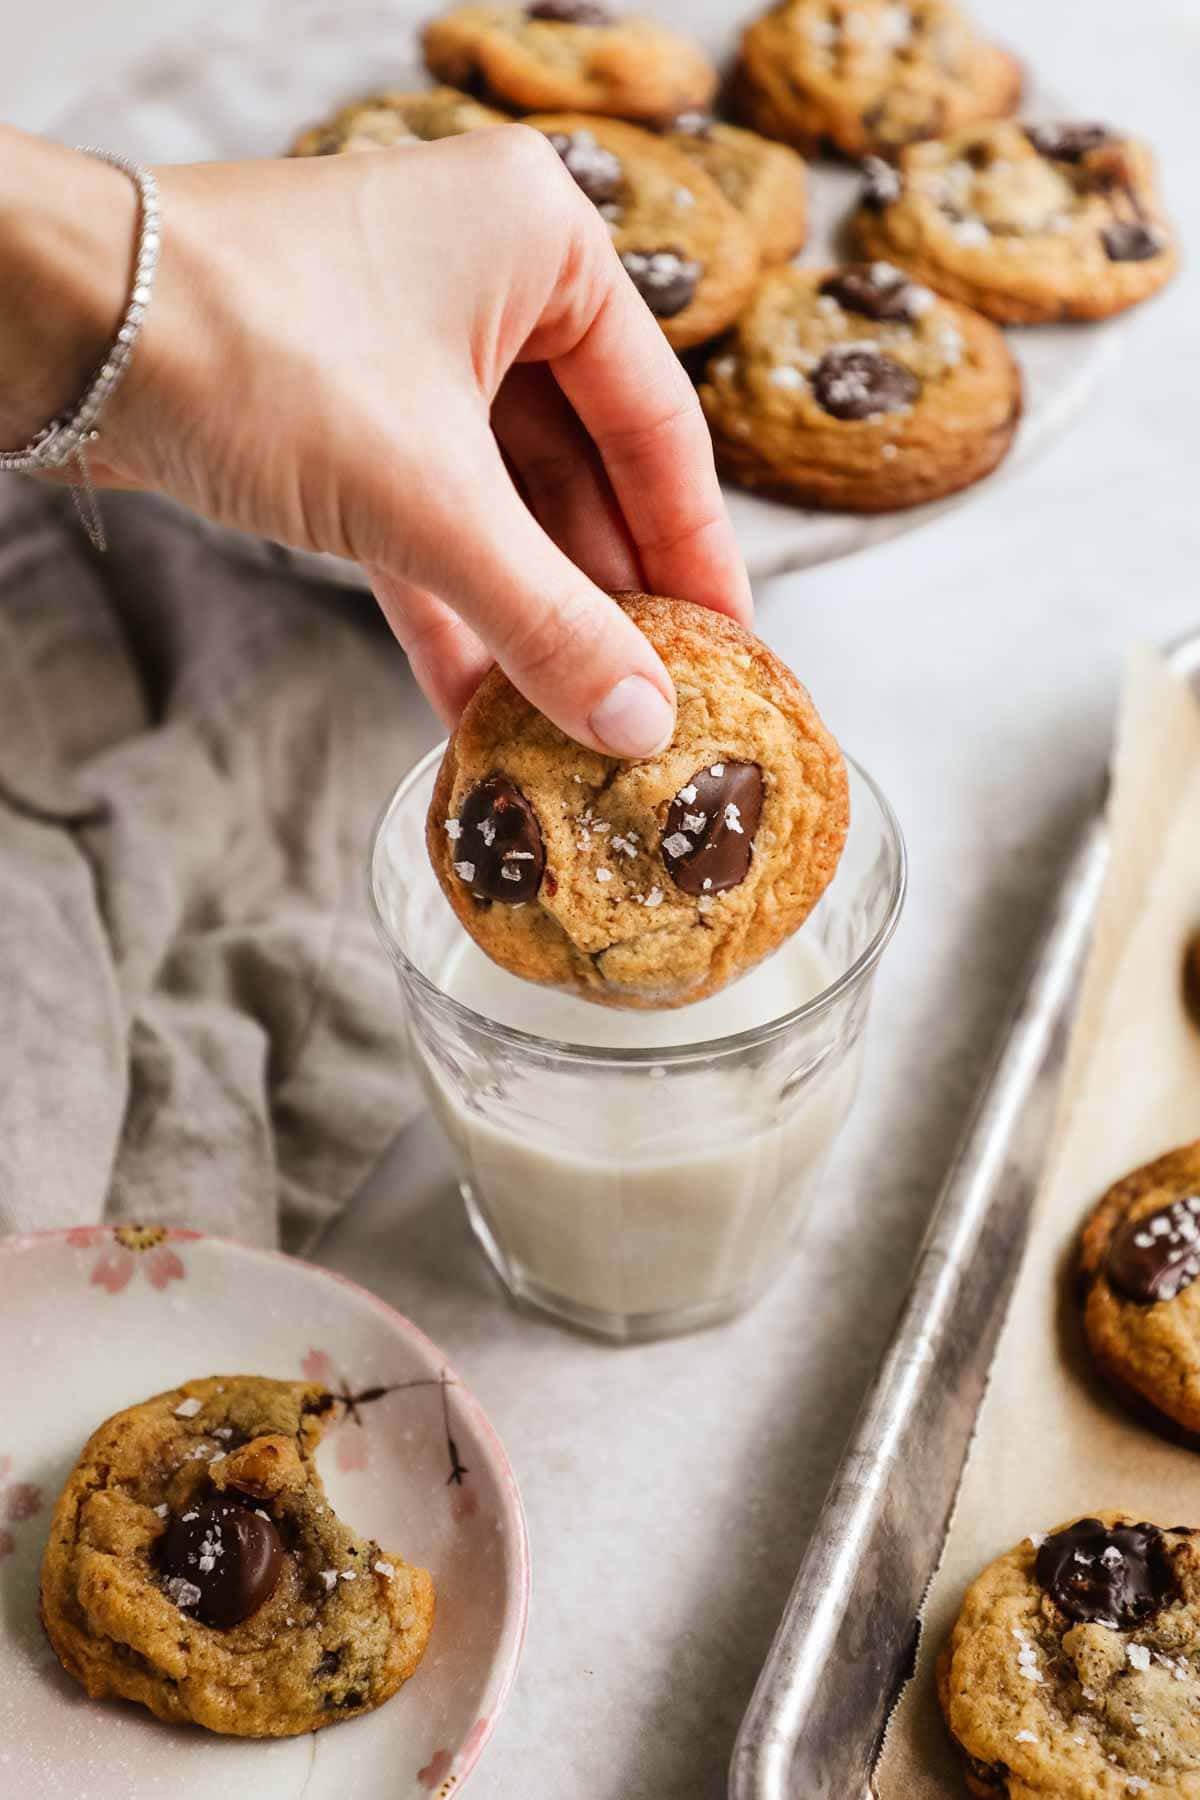 Classic crispy chewy chocolate chip walnut cookies dipped in a glass of milk.